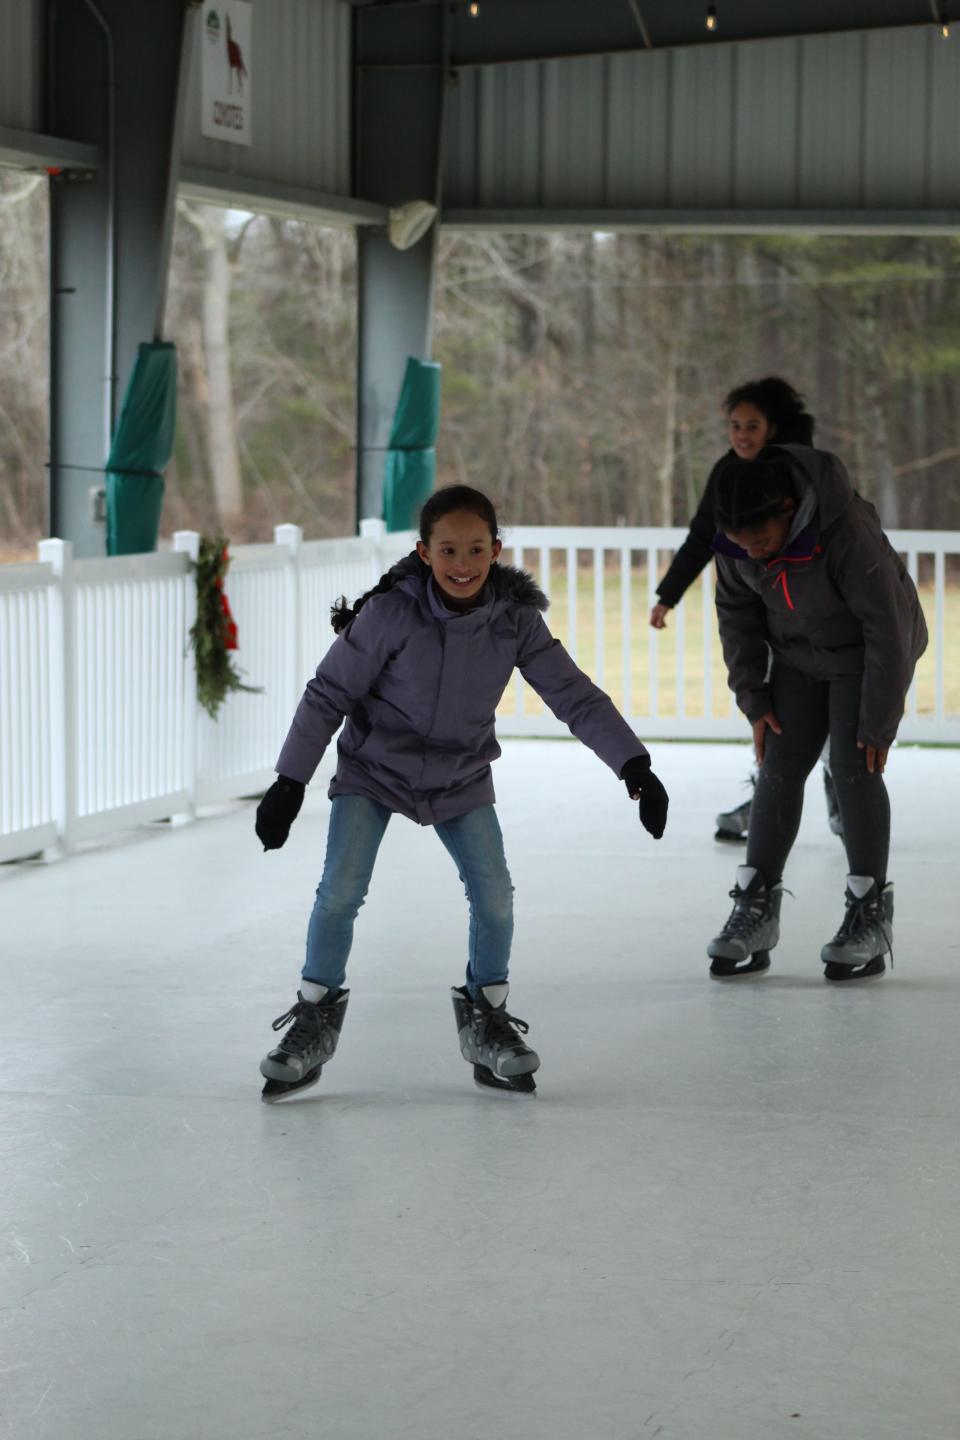 Boys & Girls Clubs of Metro South members from the Brockton clubhouse enjoy a trip out to Camp Riverside in Taunton to ice skate during December vacation at the synthetic rink.